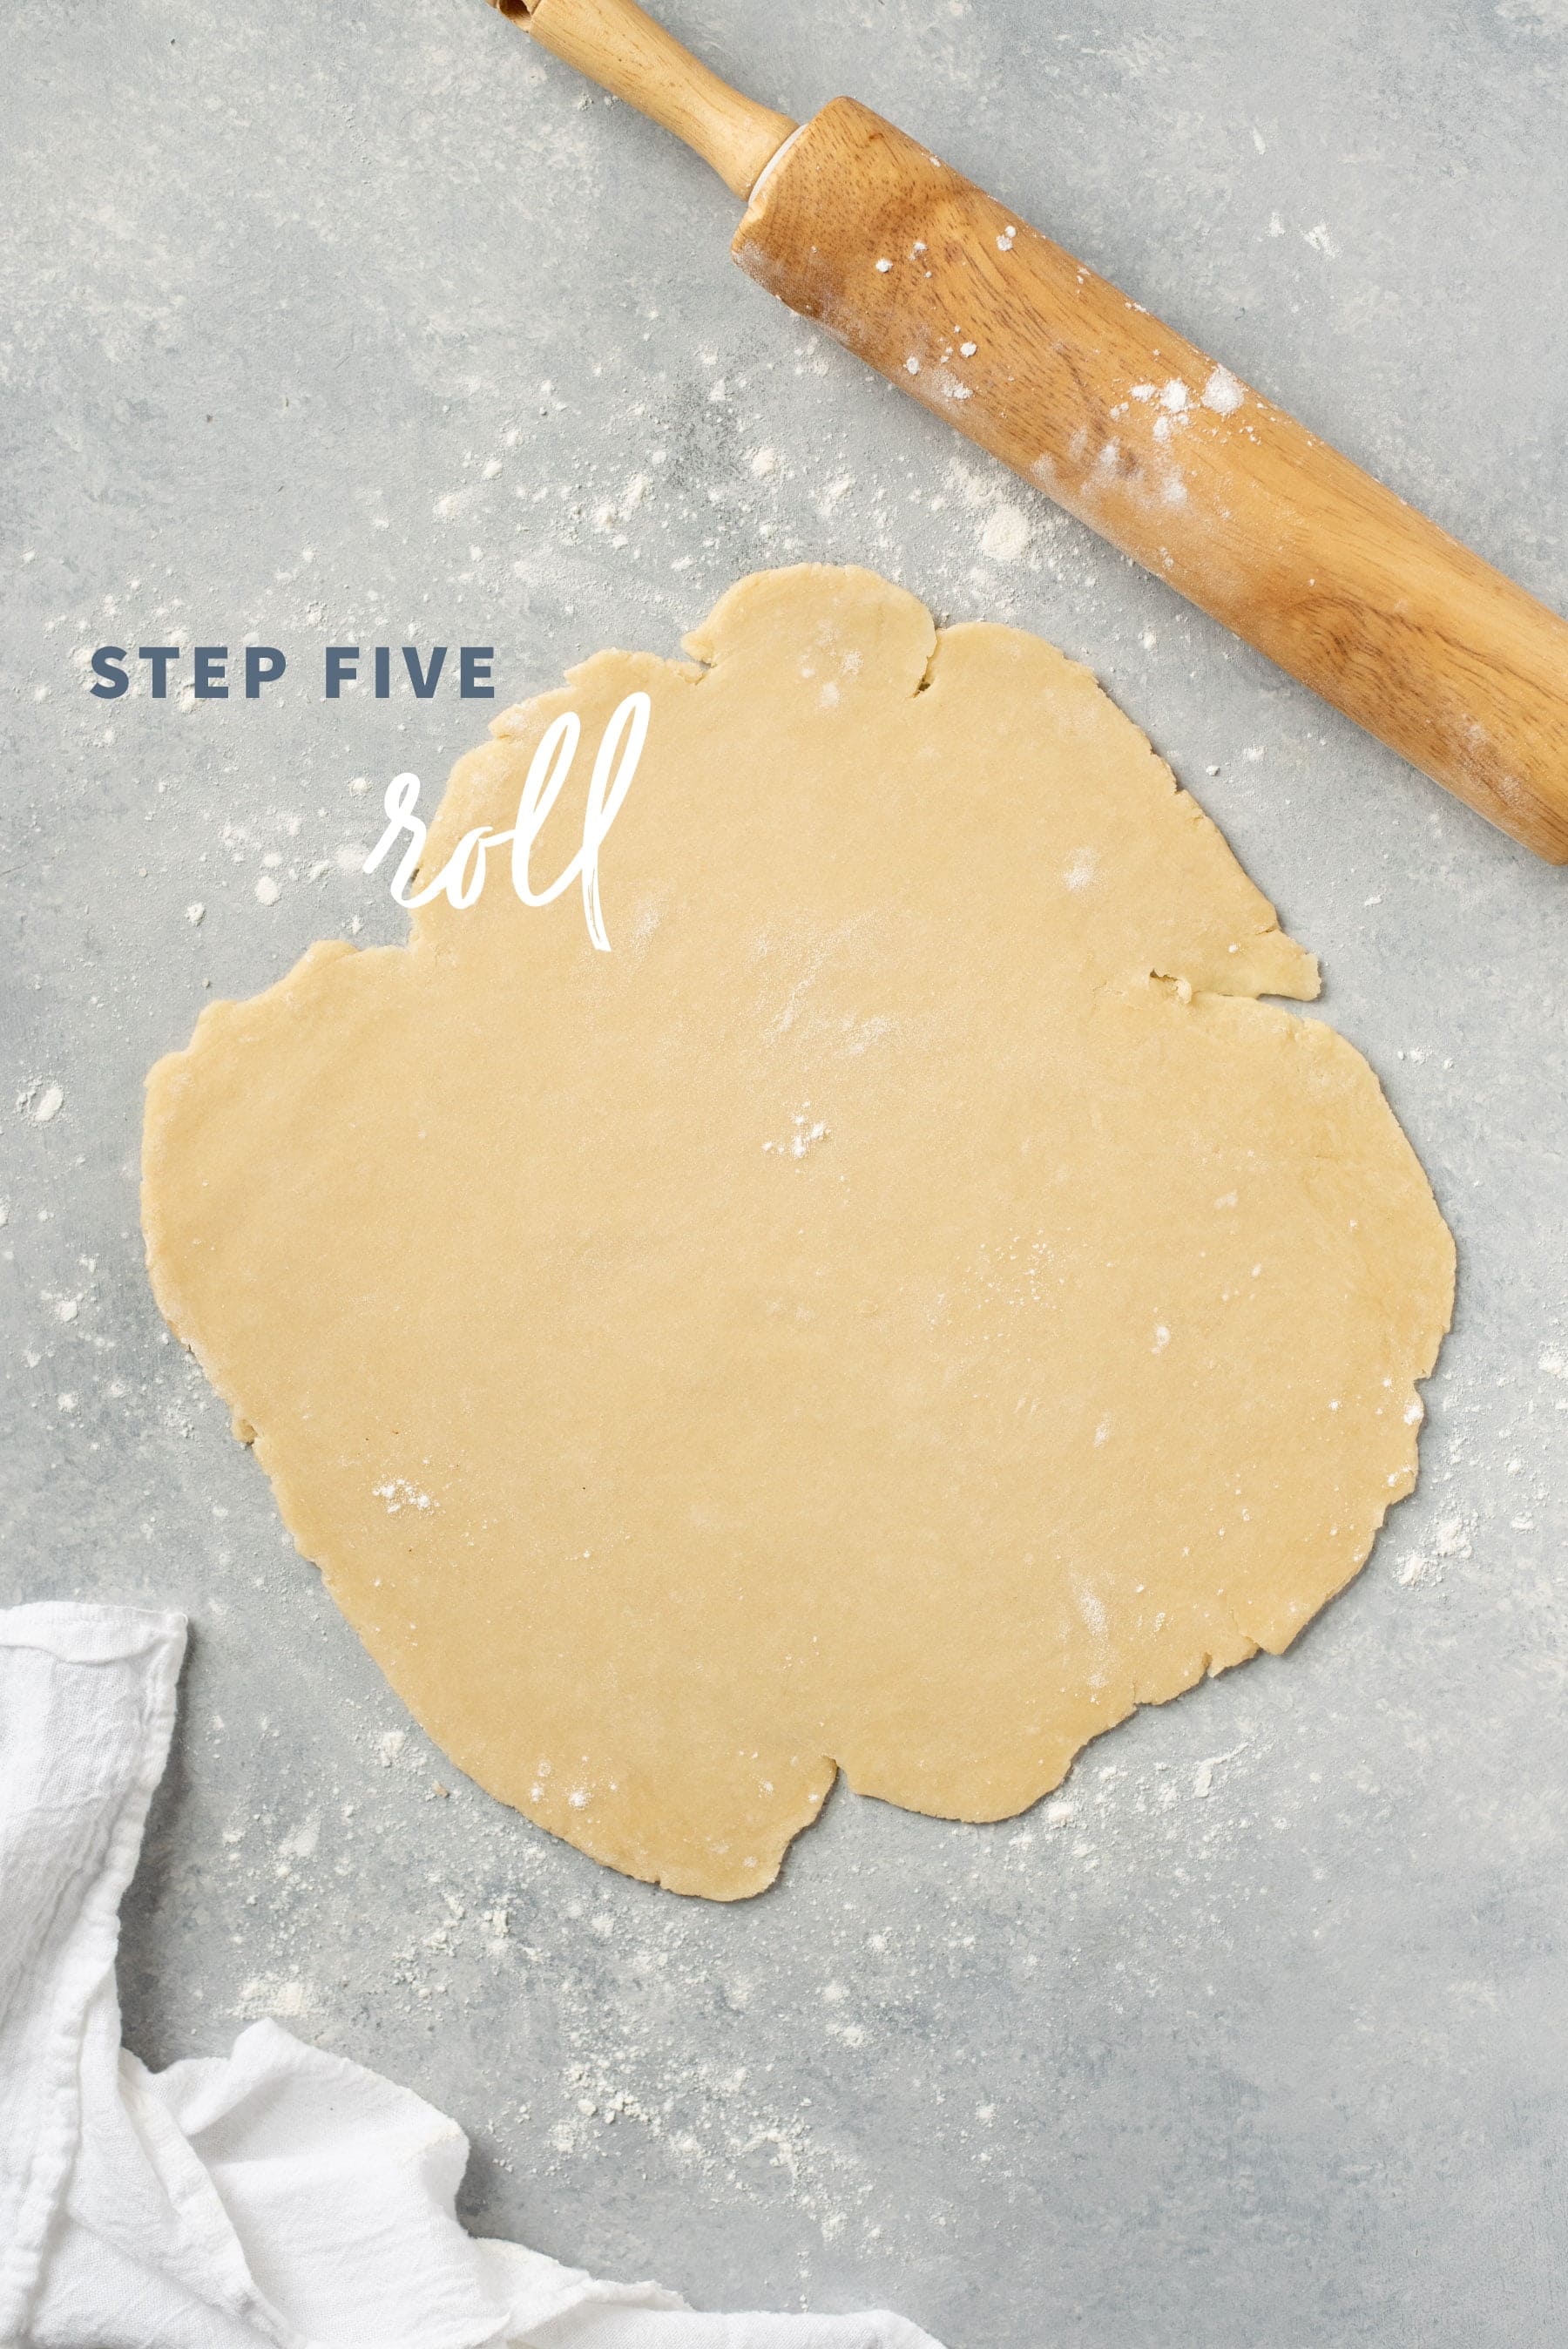 Rolled out circle of perfect pie crust dough